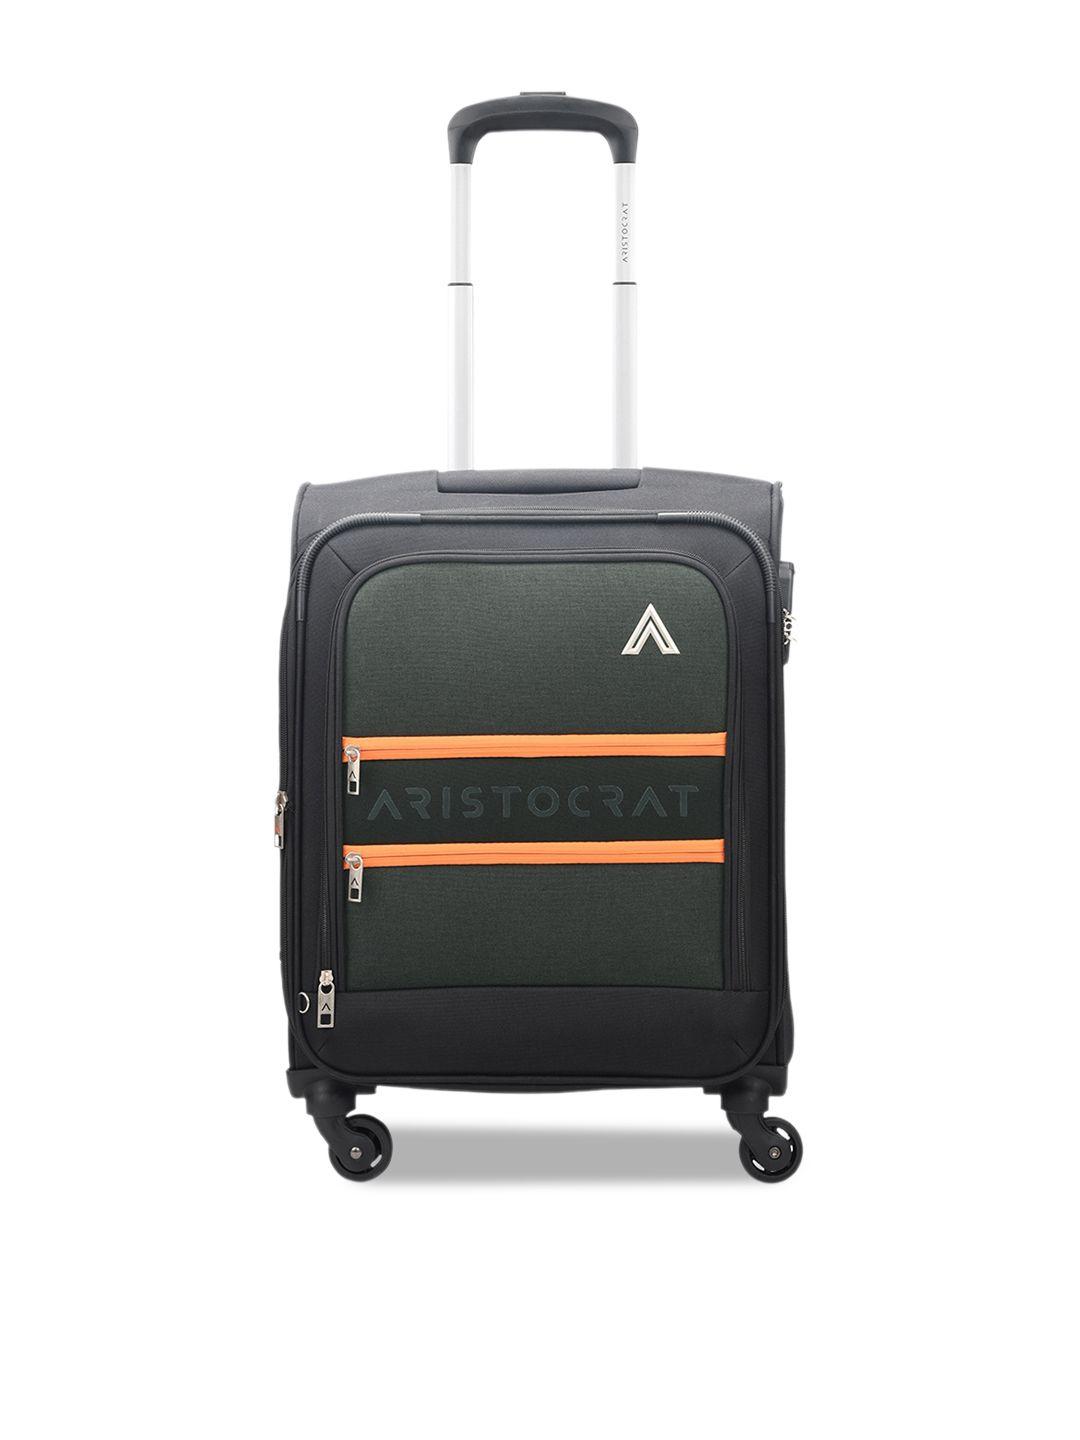 aristocrat soft sided padded trolley bag